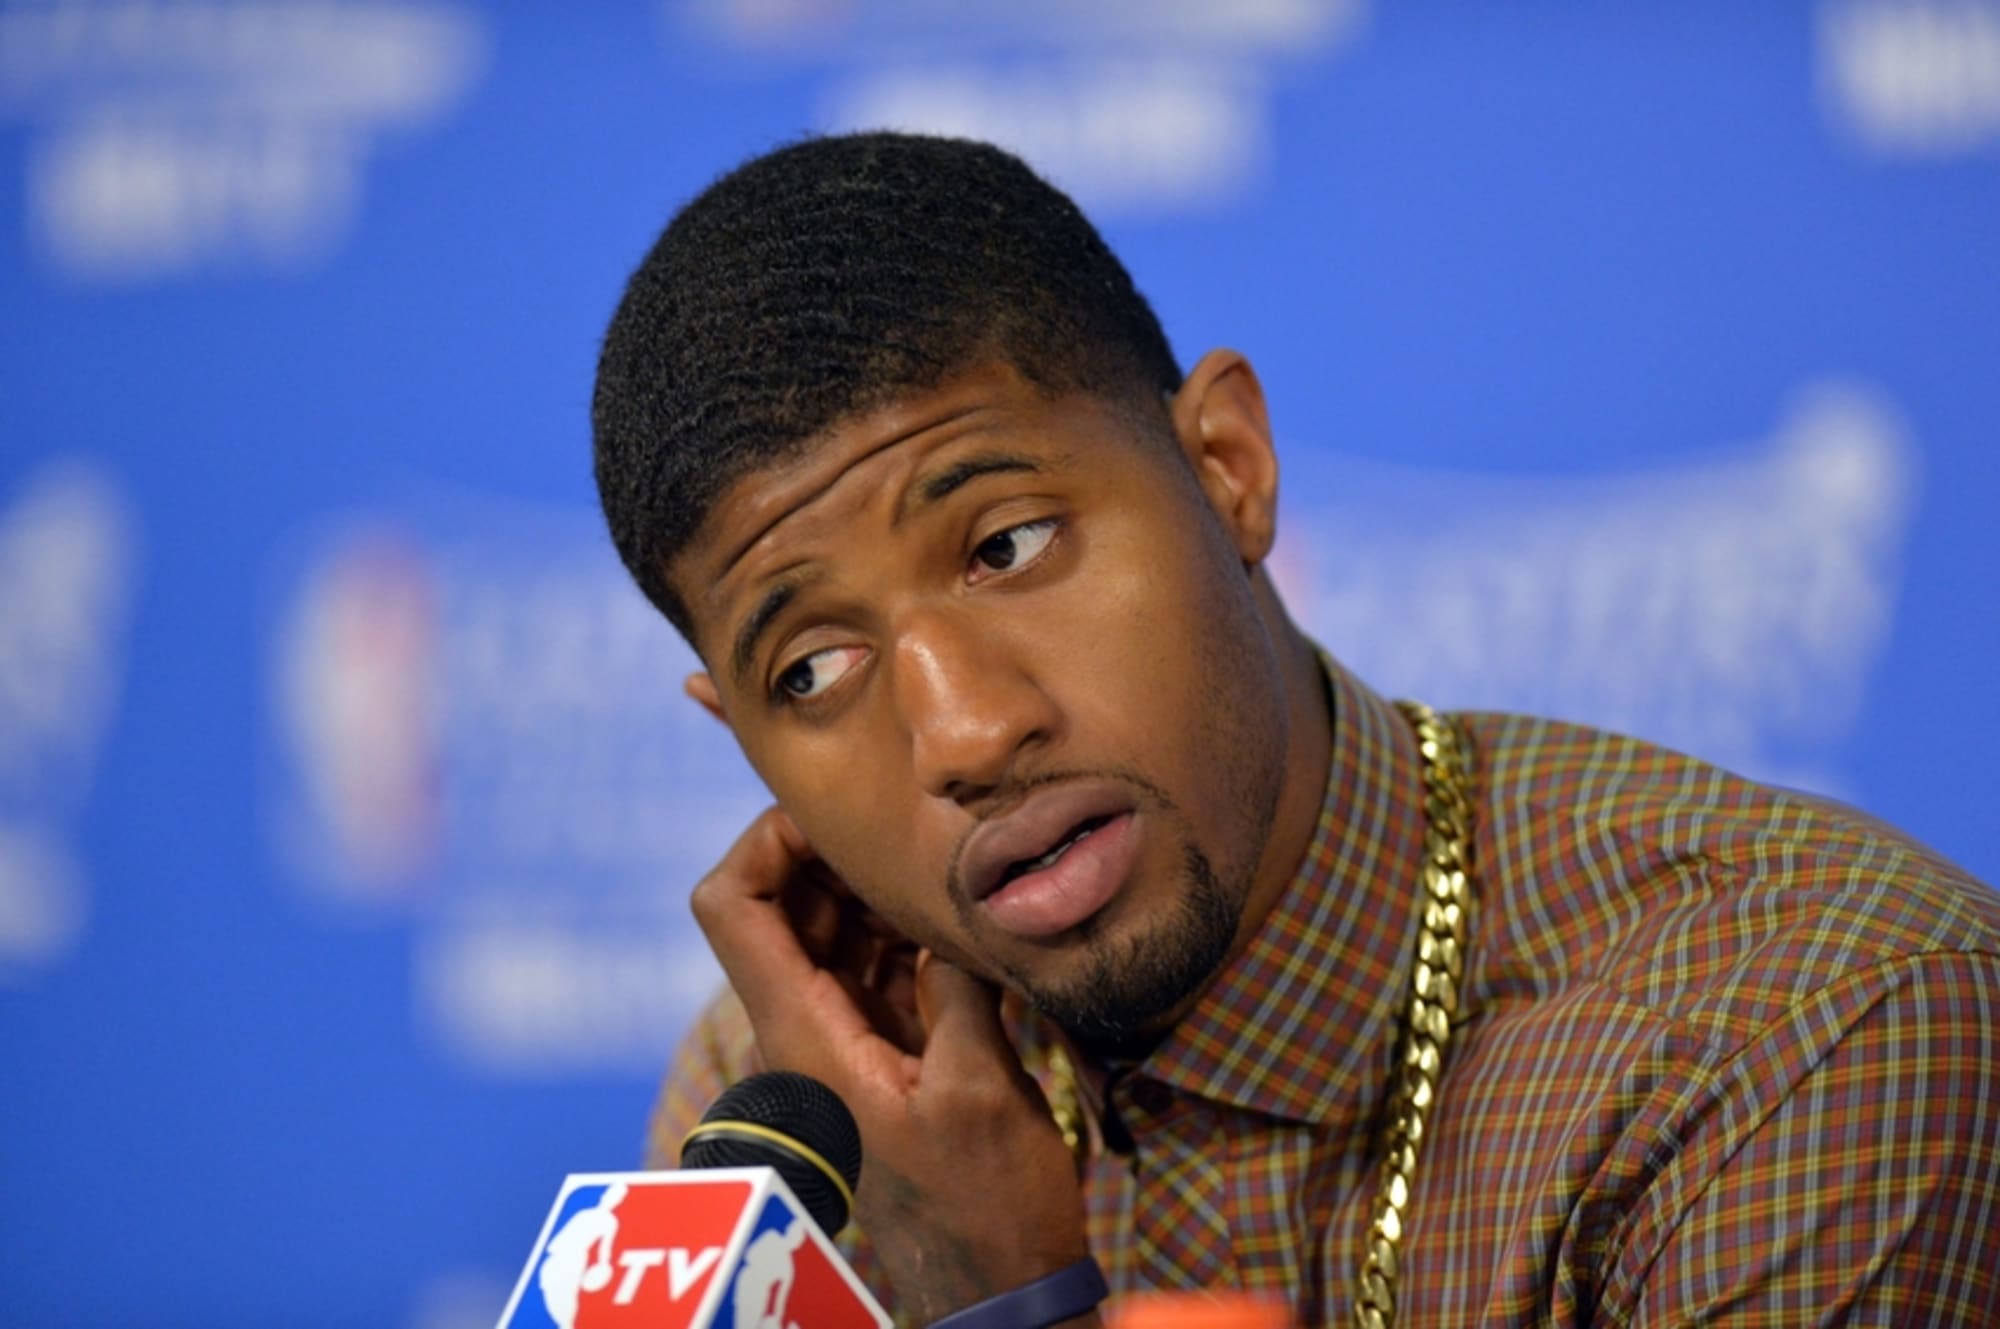 One year ago today: Paul George suffers compound fracture